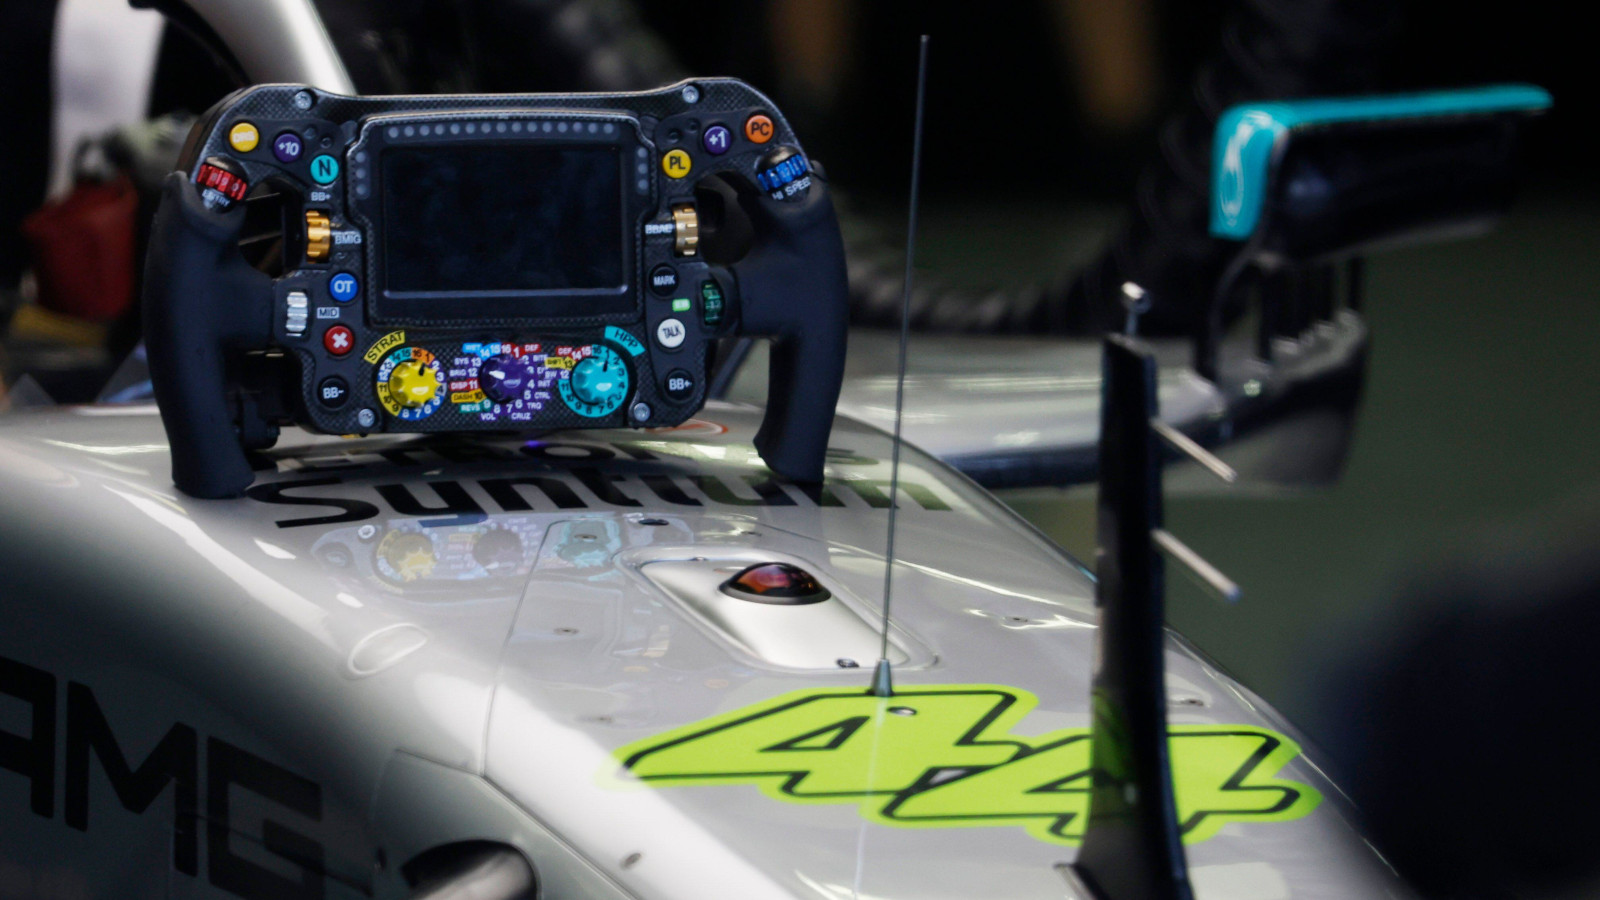 Lewis Hamilton's Mercedes 44 with its steering wheel. Bahrain March 2022